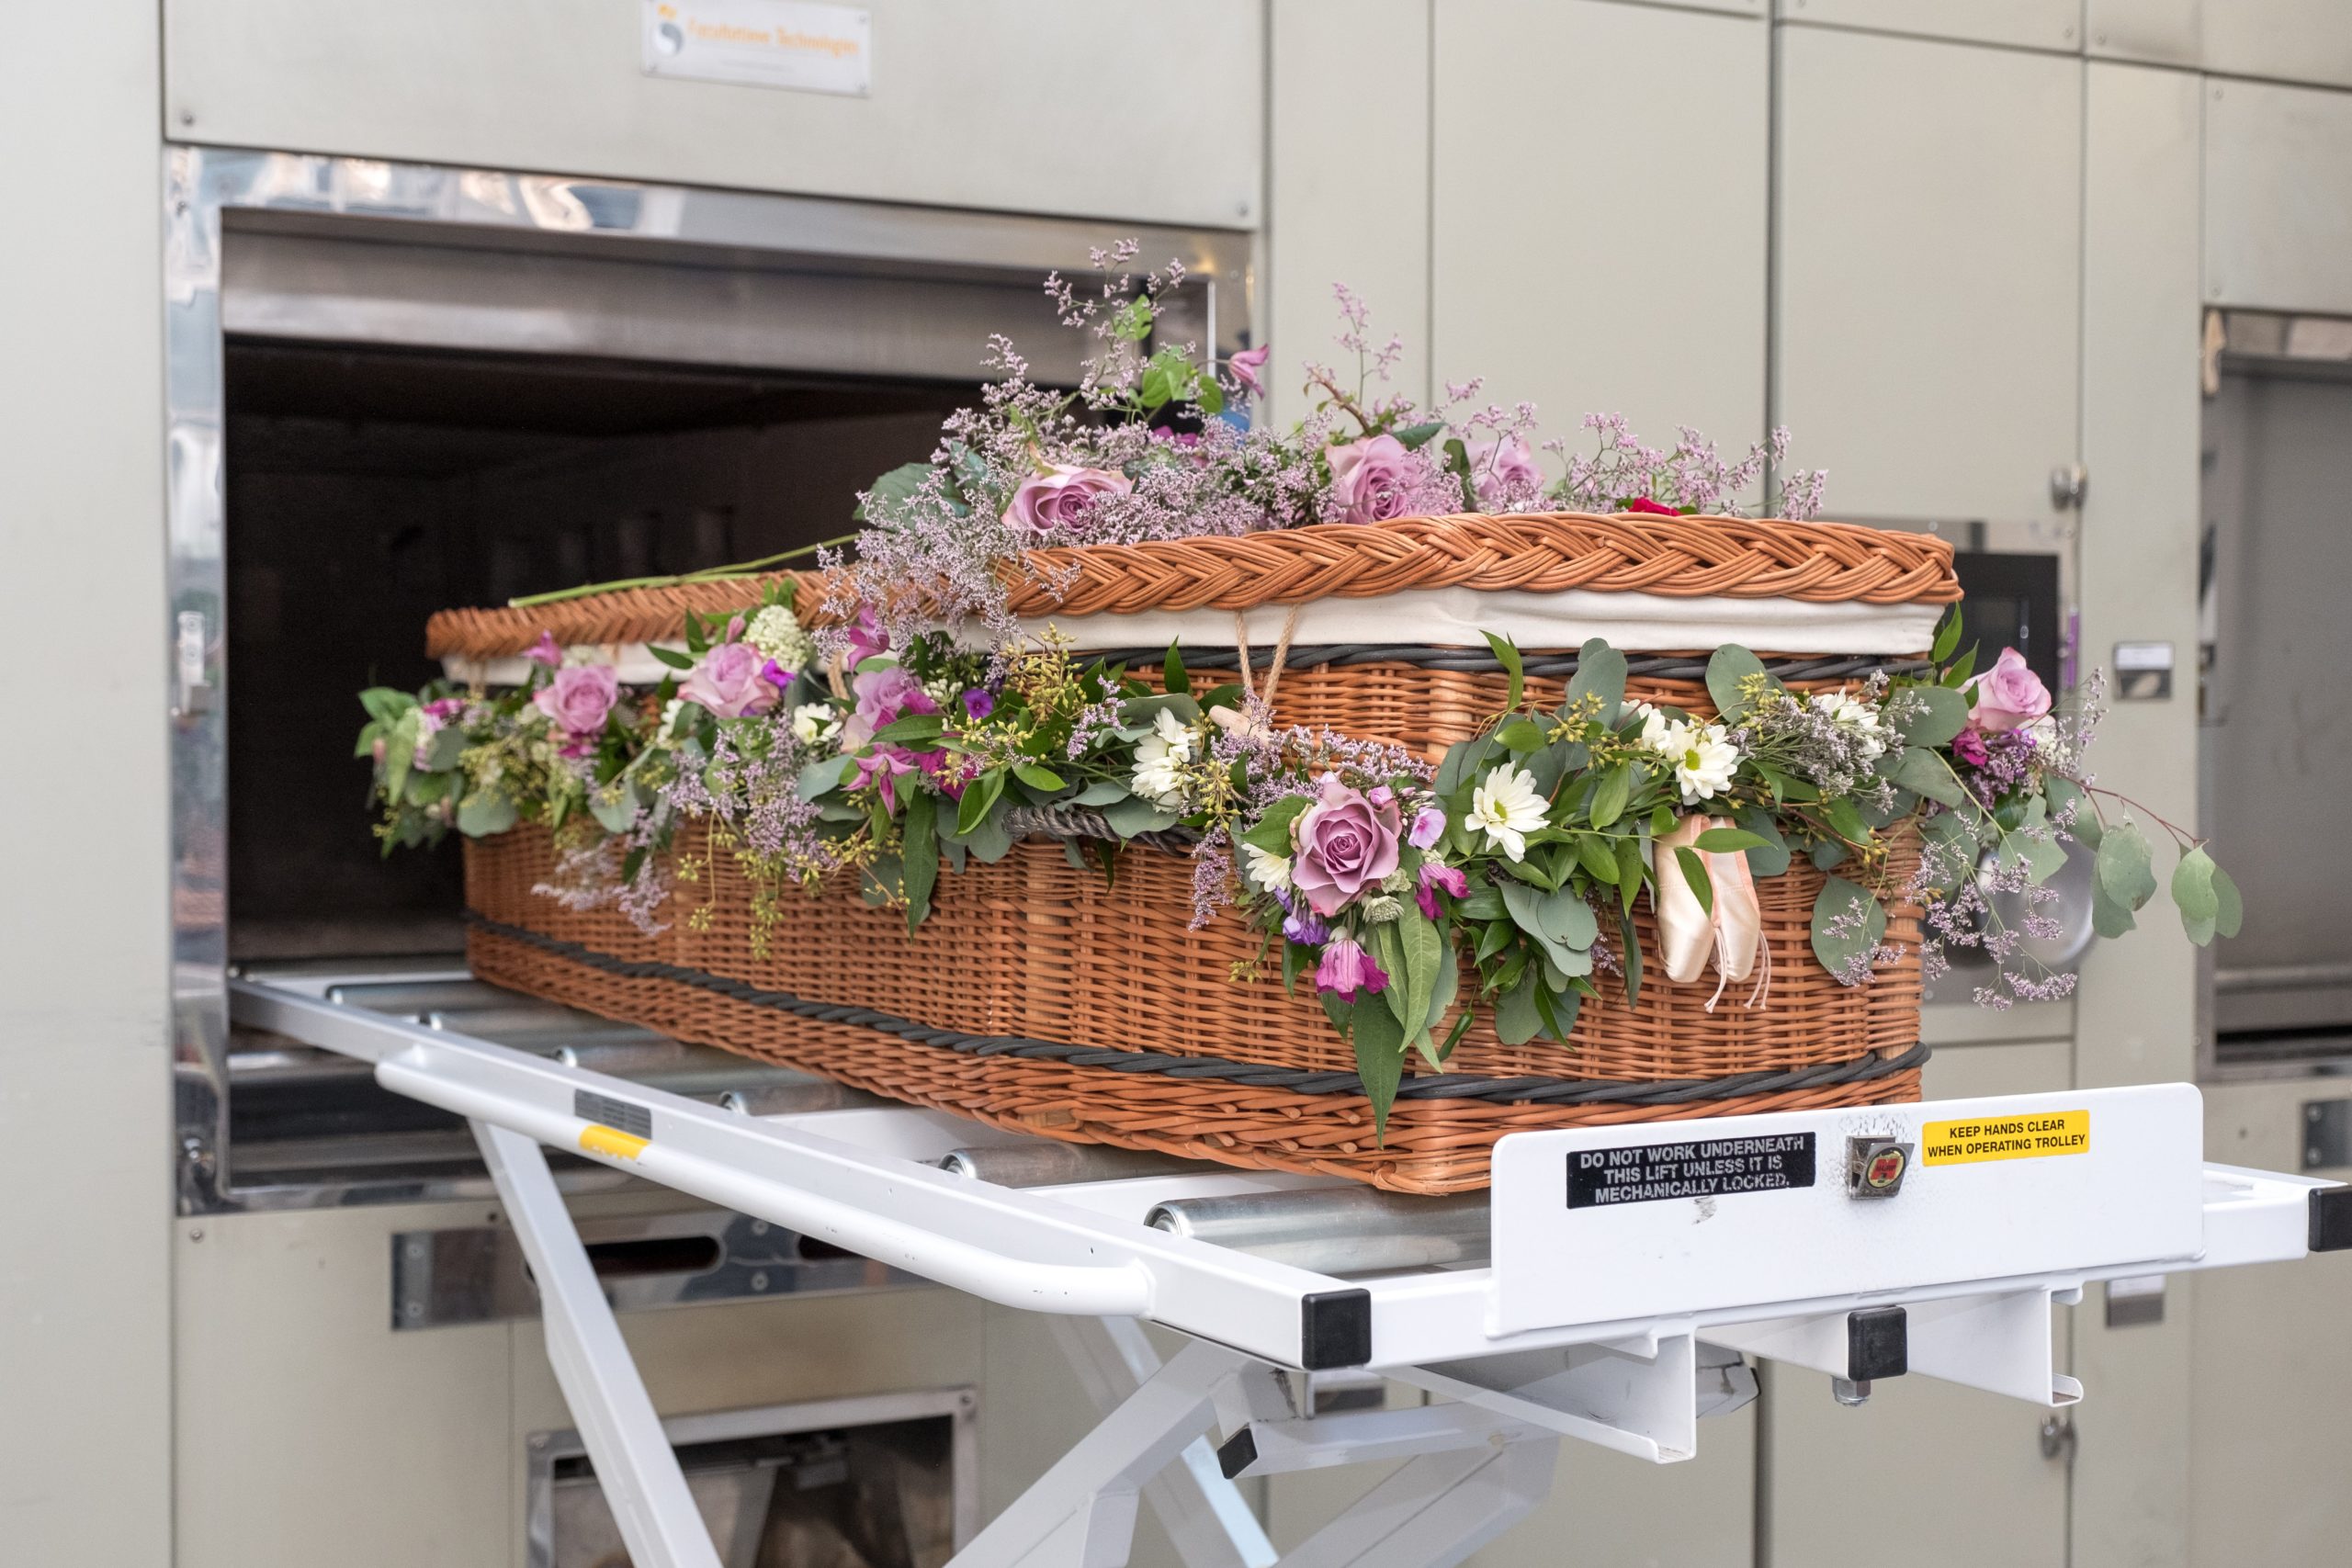 cremation services in Baltimore, MD